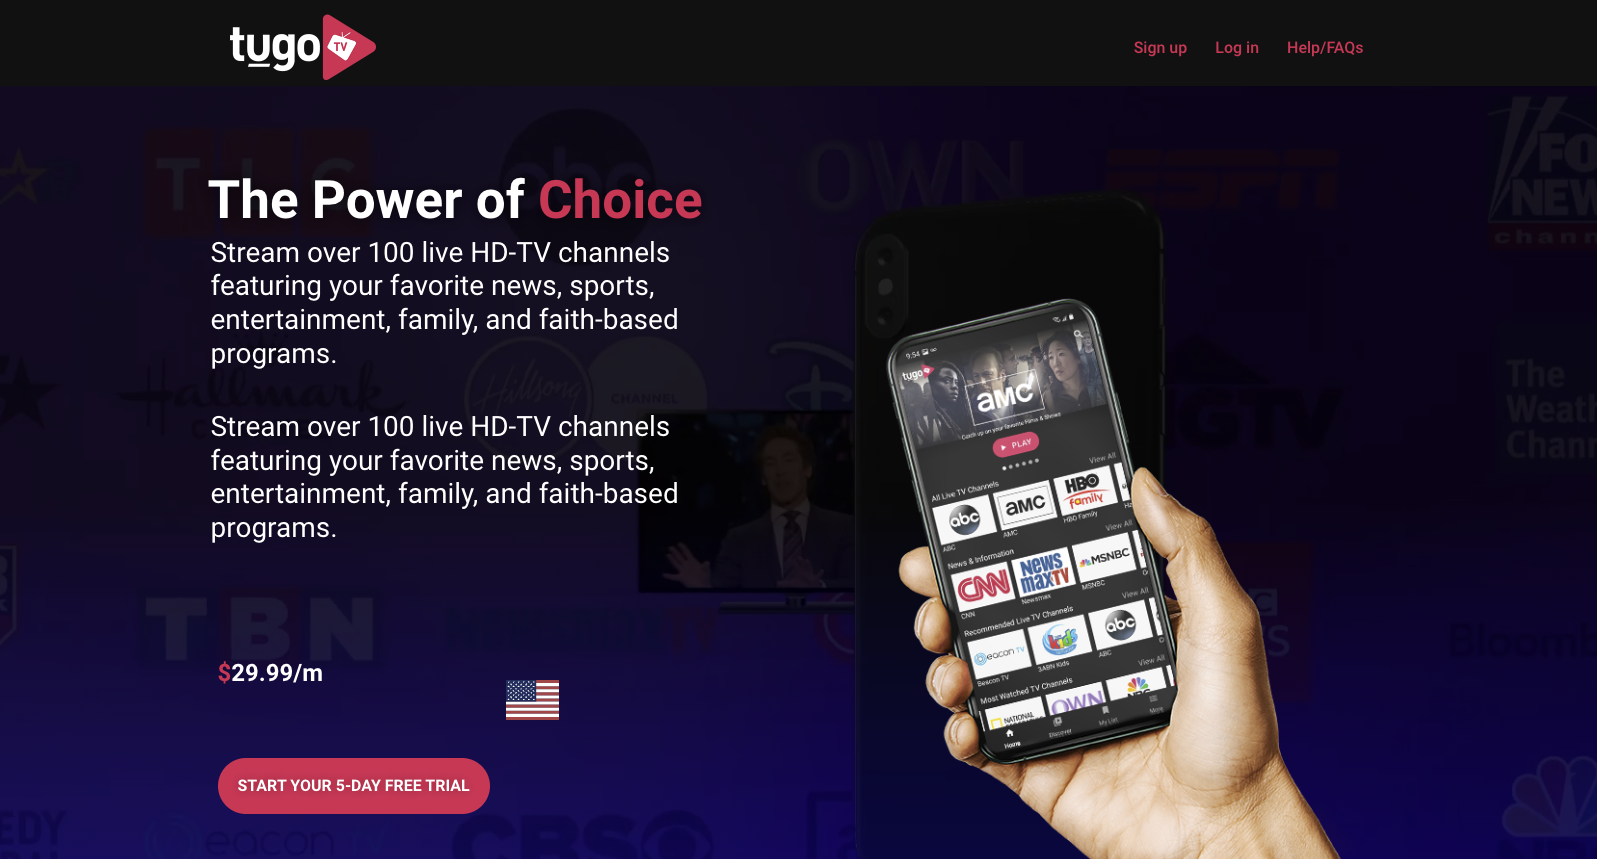 Tugo TV is a popular live TV service with a quality selection of live channels.